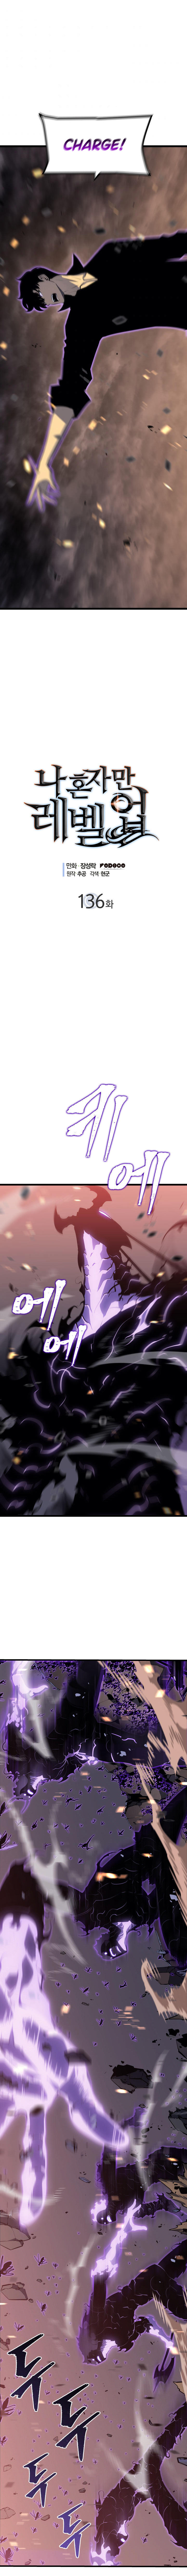 Solo Leveling Vol.2 Chapter 136  